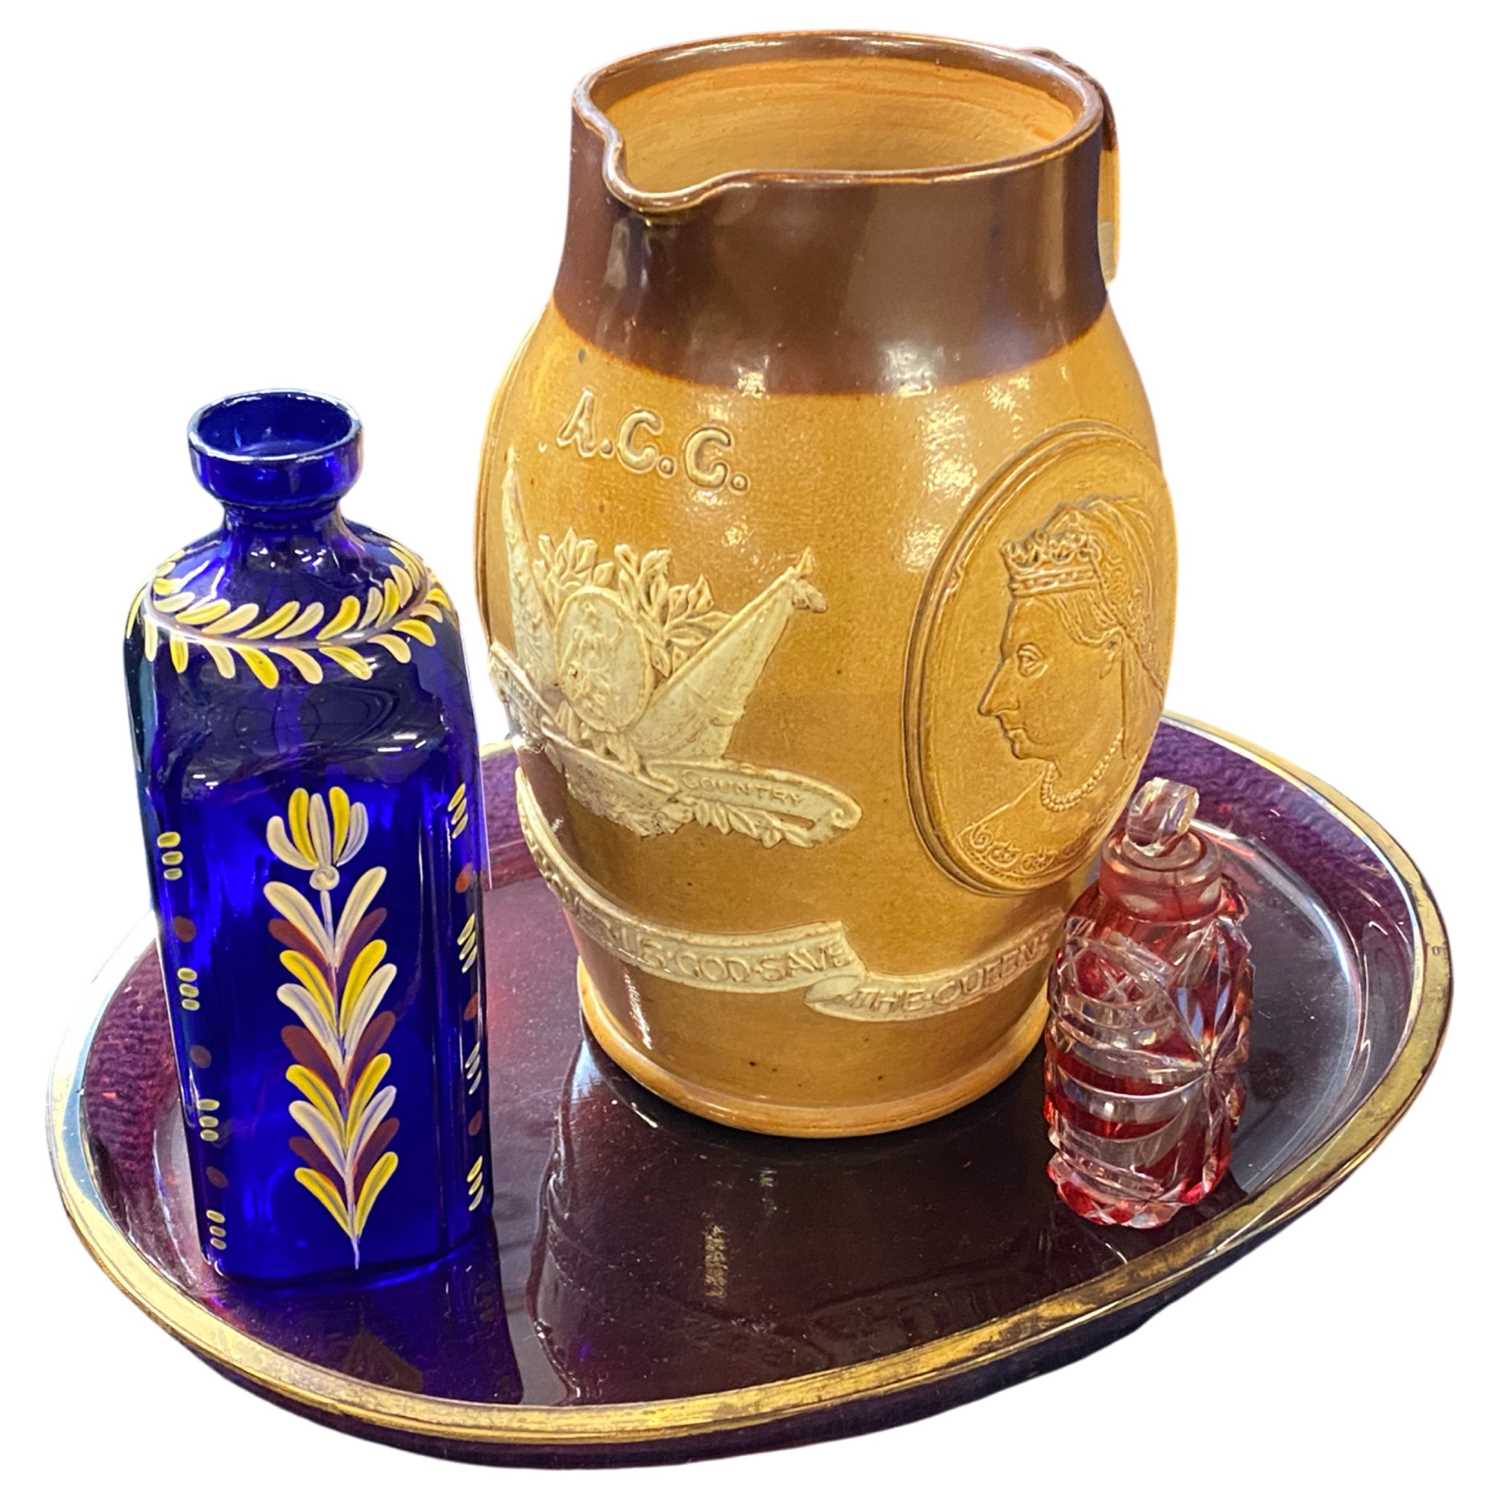 A Doulton commemorative Victoria jug together with a small glass scent bottle with ruby flashing and